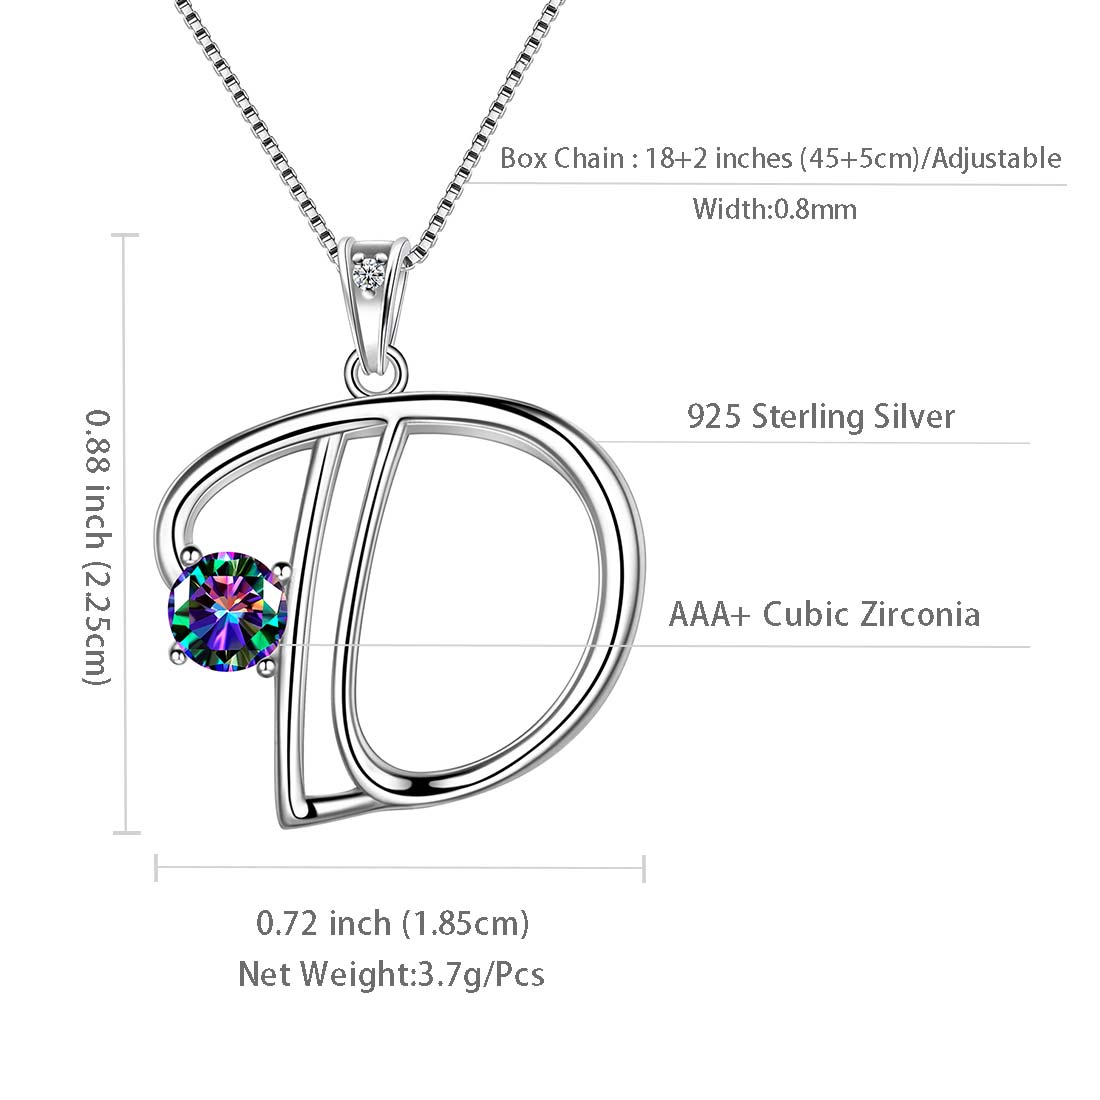 Women Letter D Initial Necklaces Sterling Silver - Necklaces - Aurora Tears Jewelry